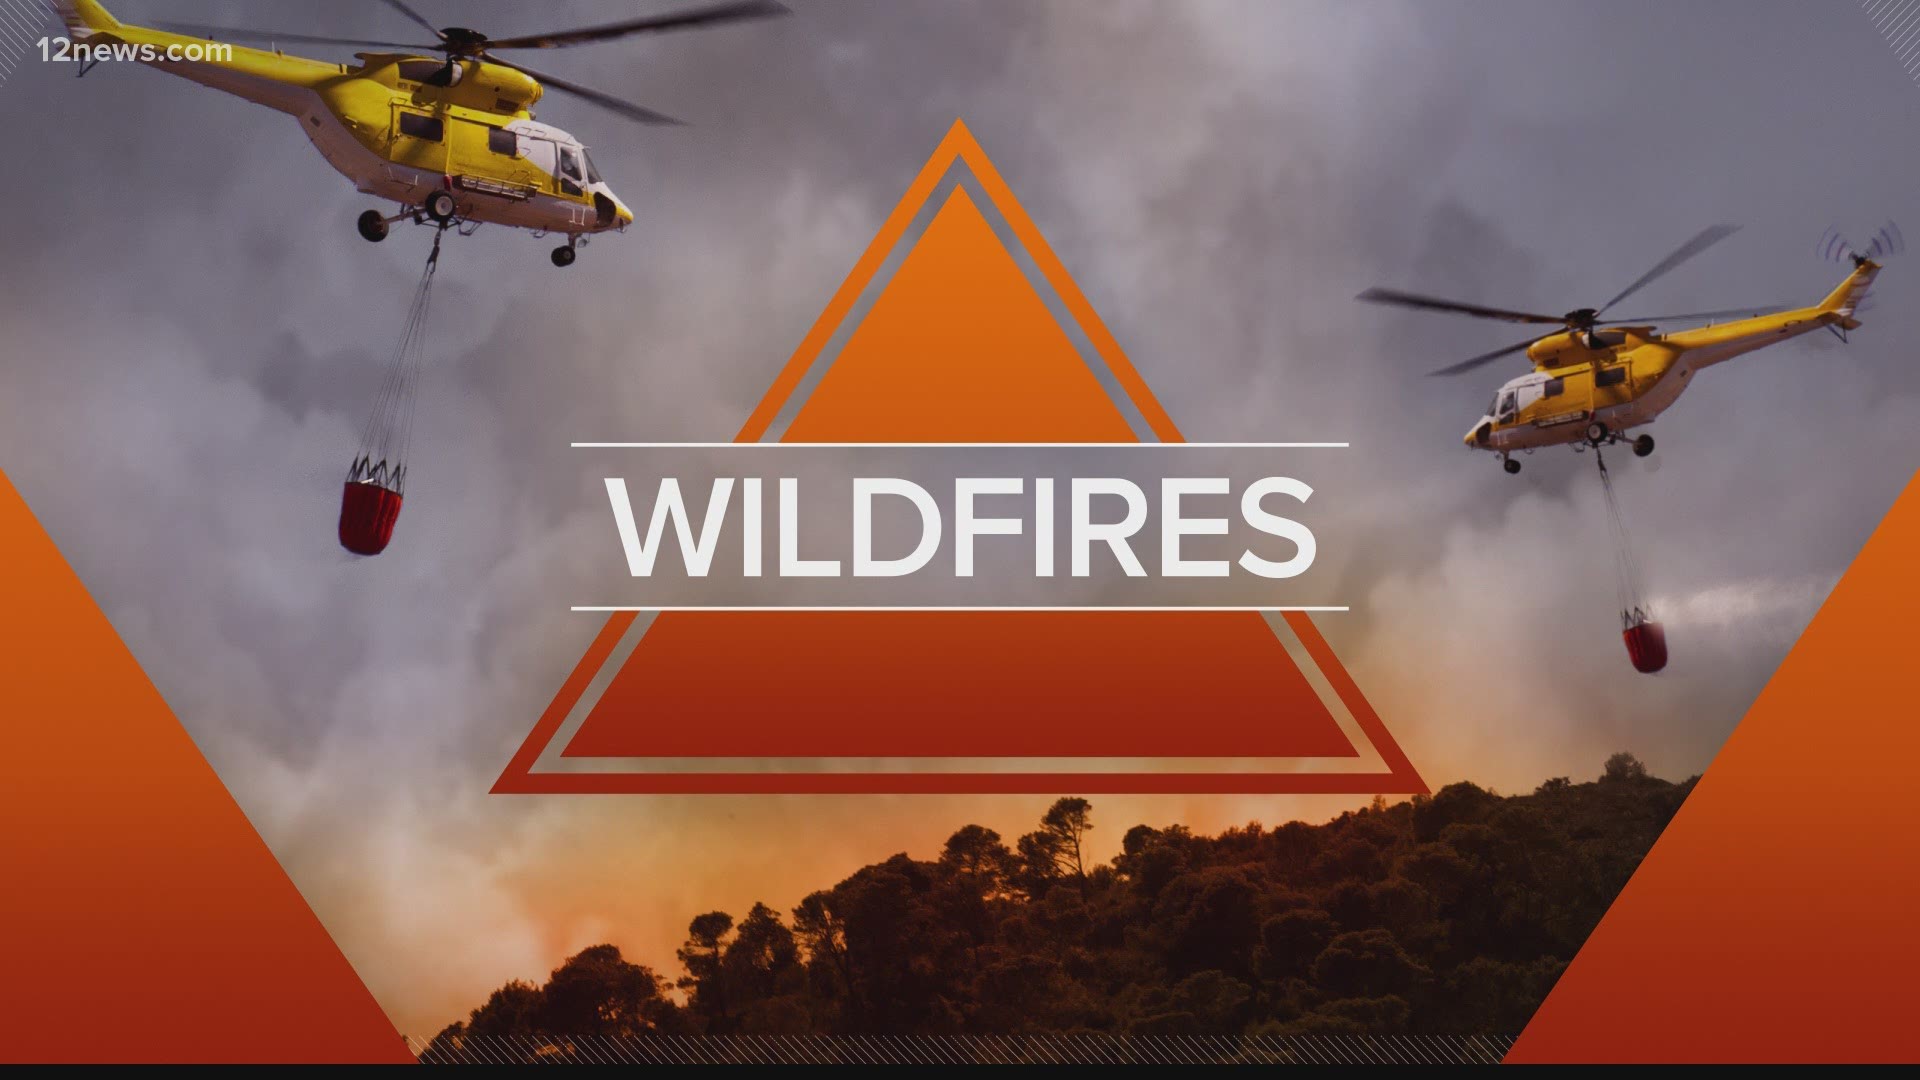 There are several wildfires currently burning across Arizona. Here are the latest updates for June 21, 2021.